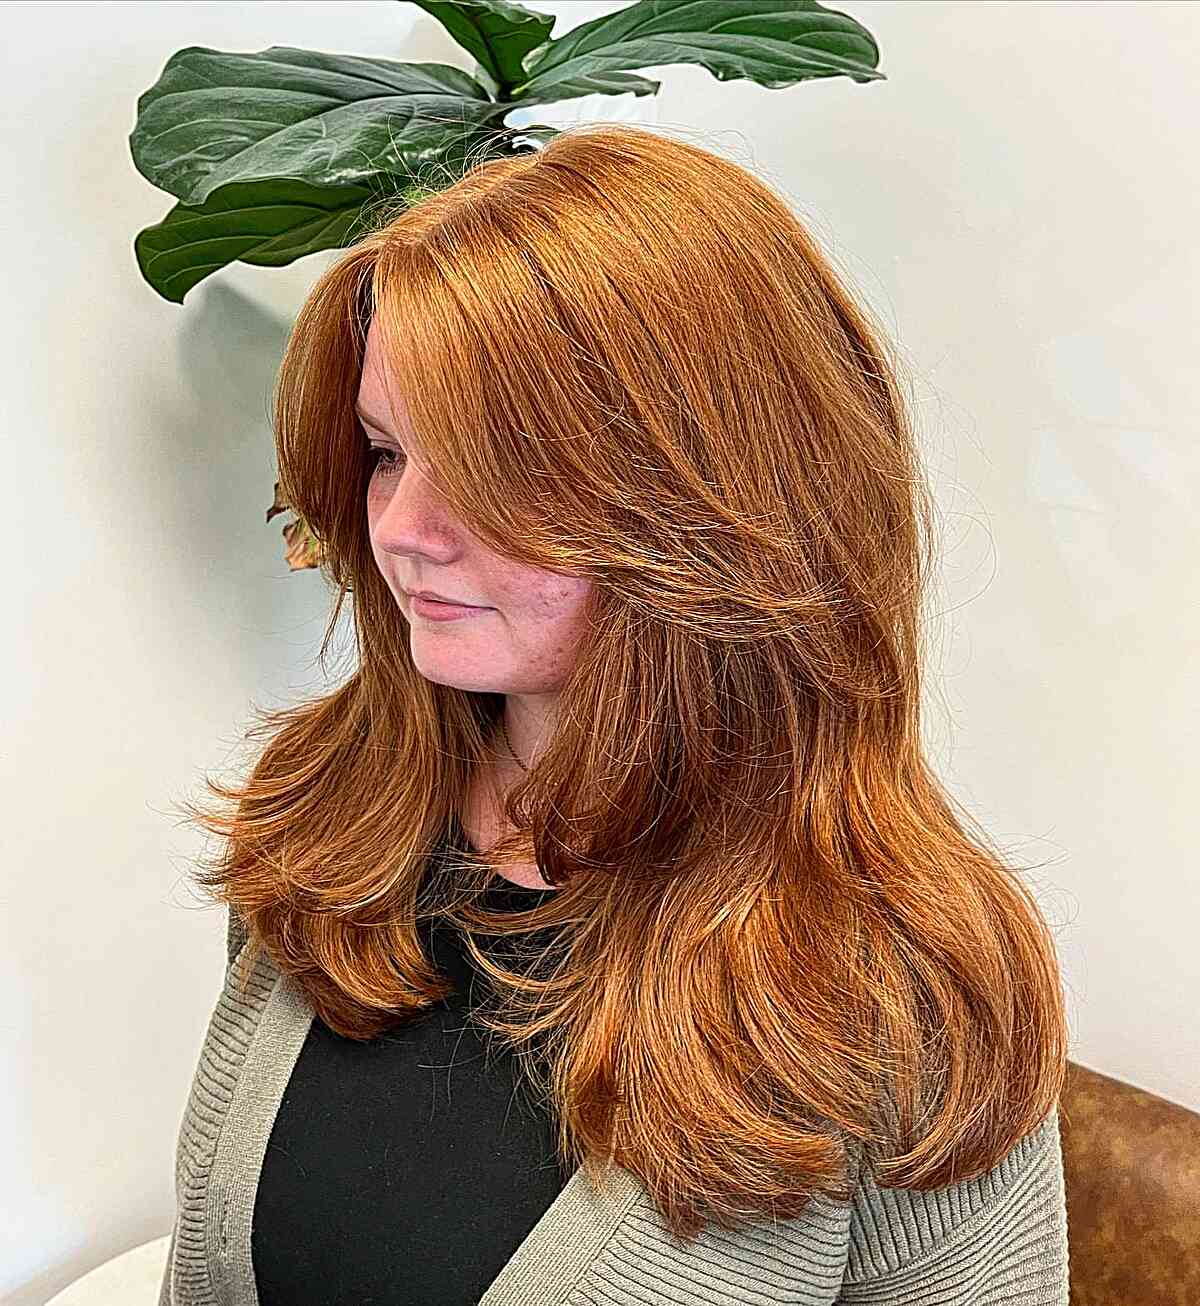 Face-Framing Elongated Layered Cut on Thick, Copper Hair